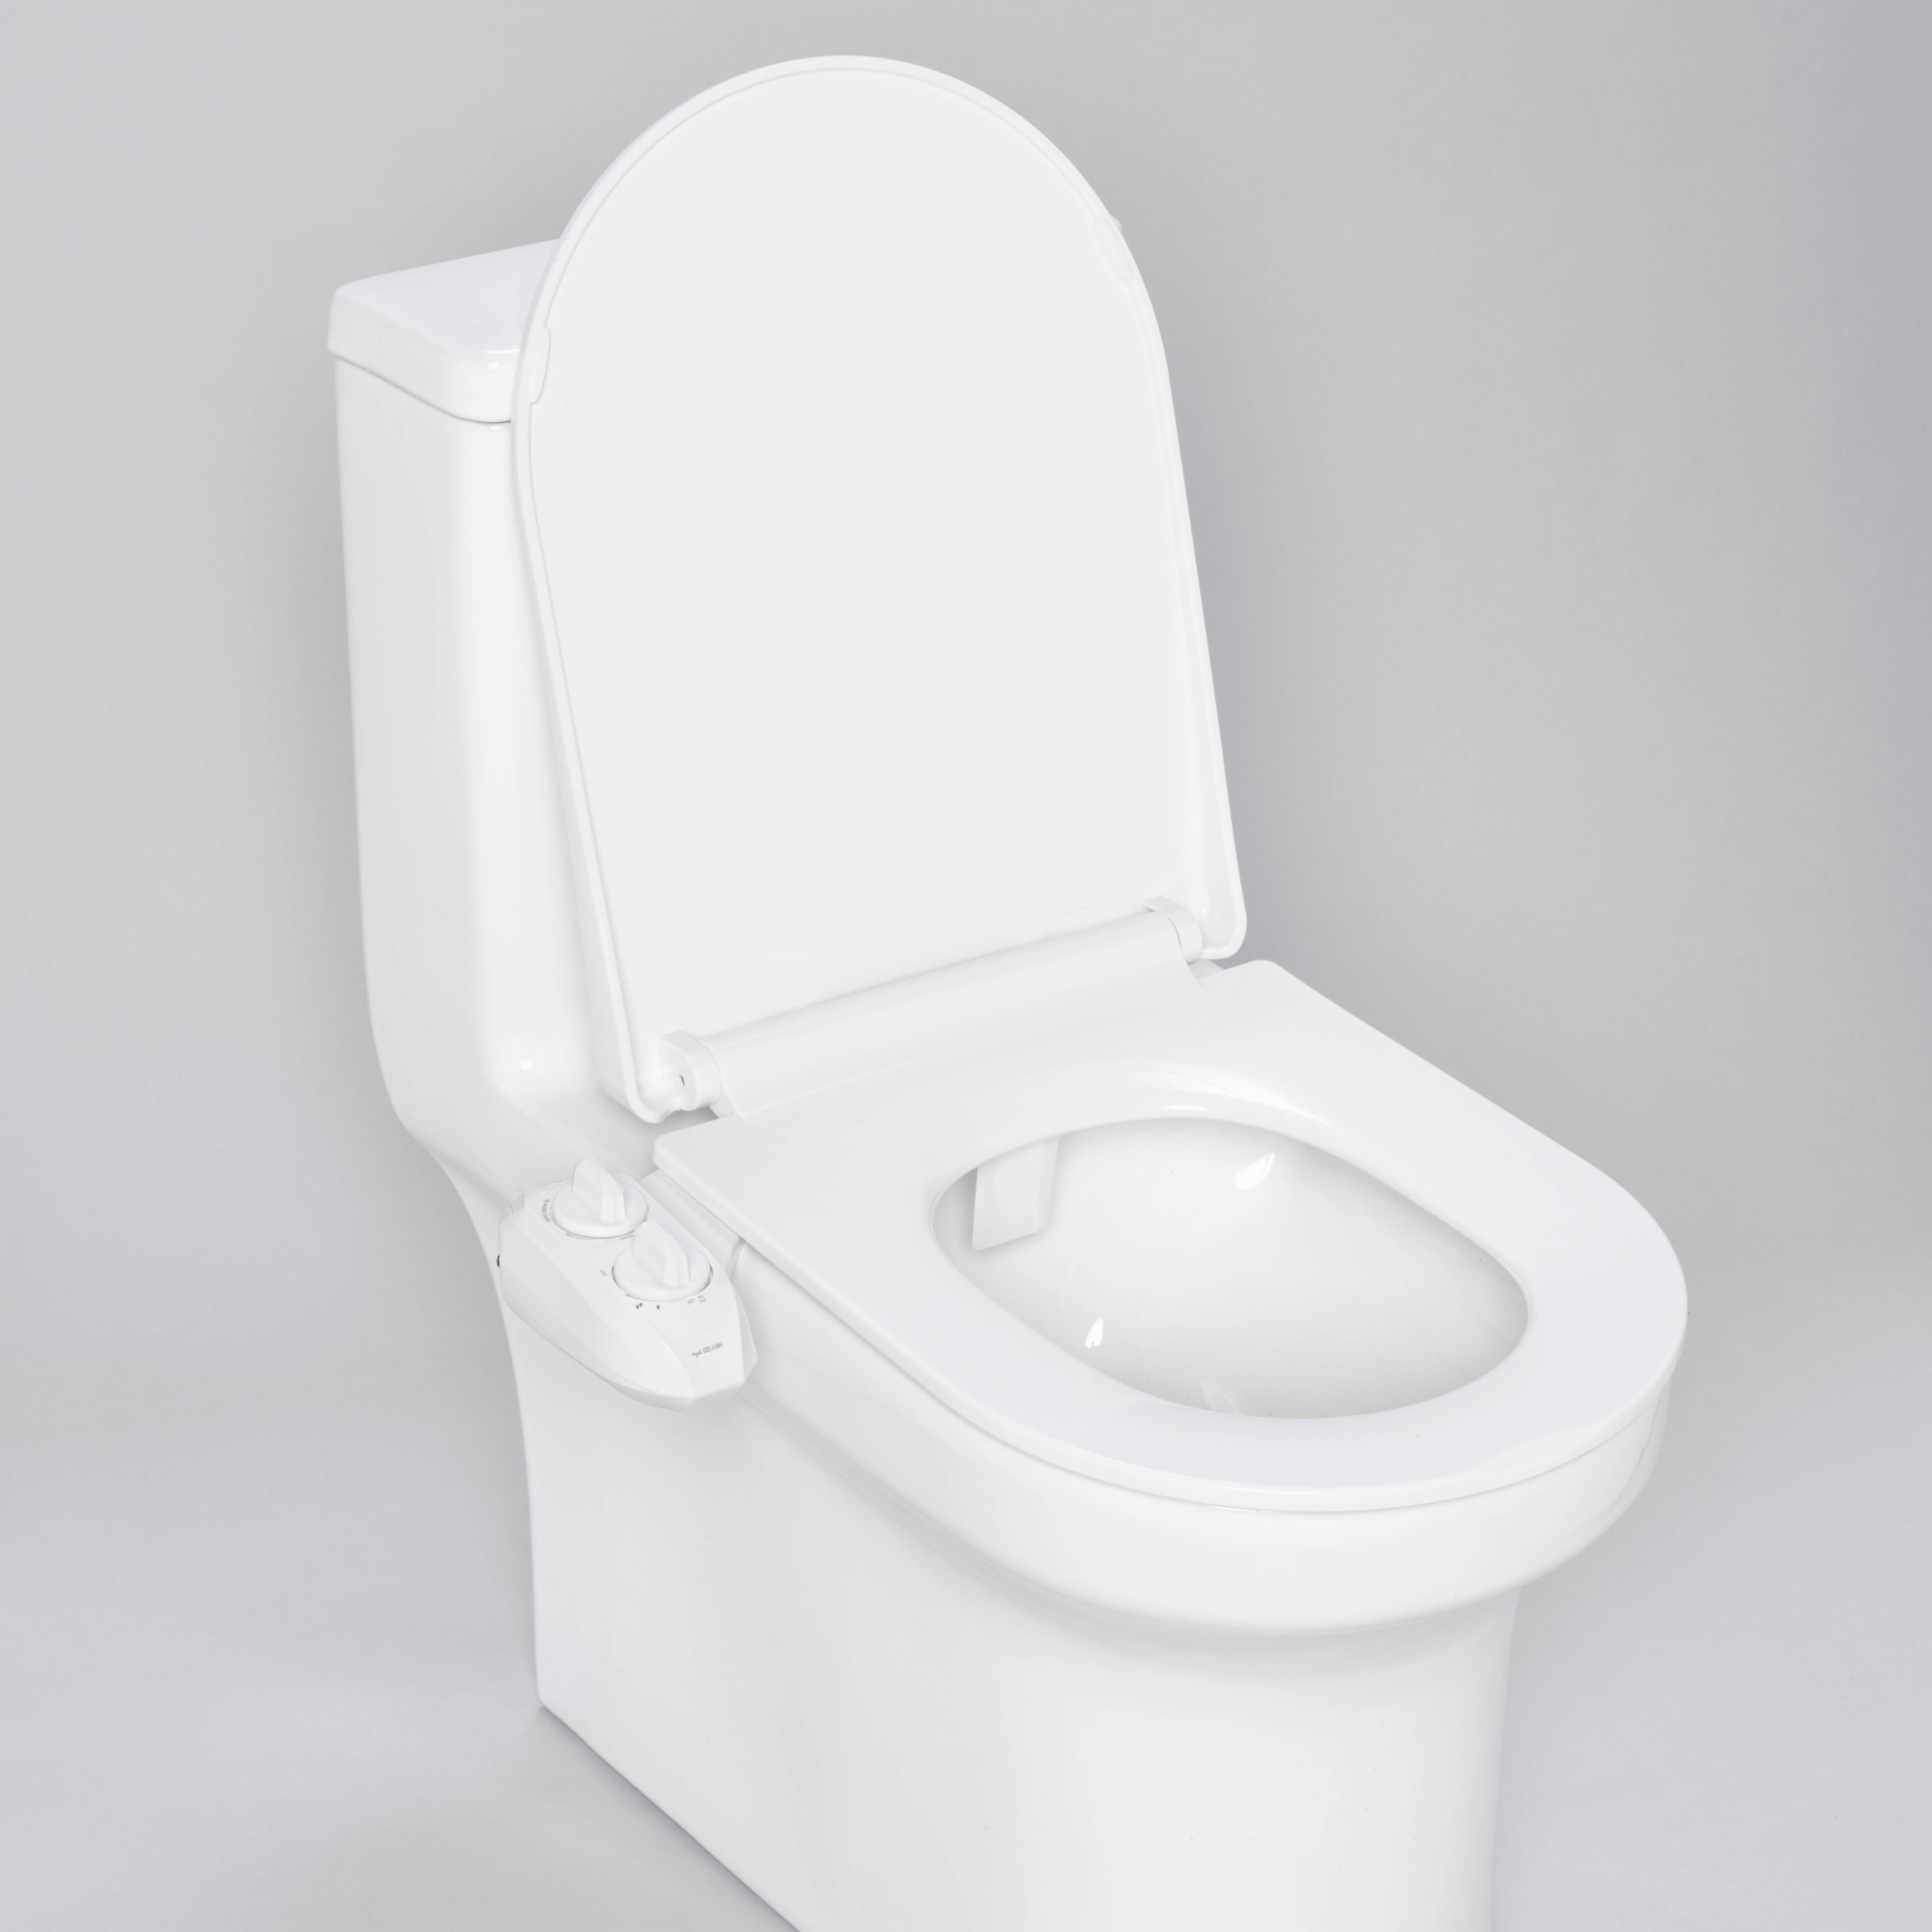 NEO 120 Plus: Imperfect Packaging - NEO 120 Plus White installed on a modern toilet, with lid open